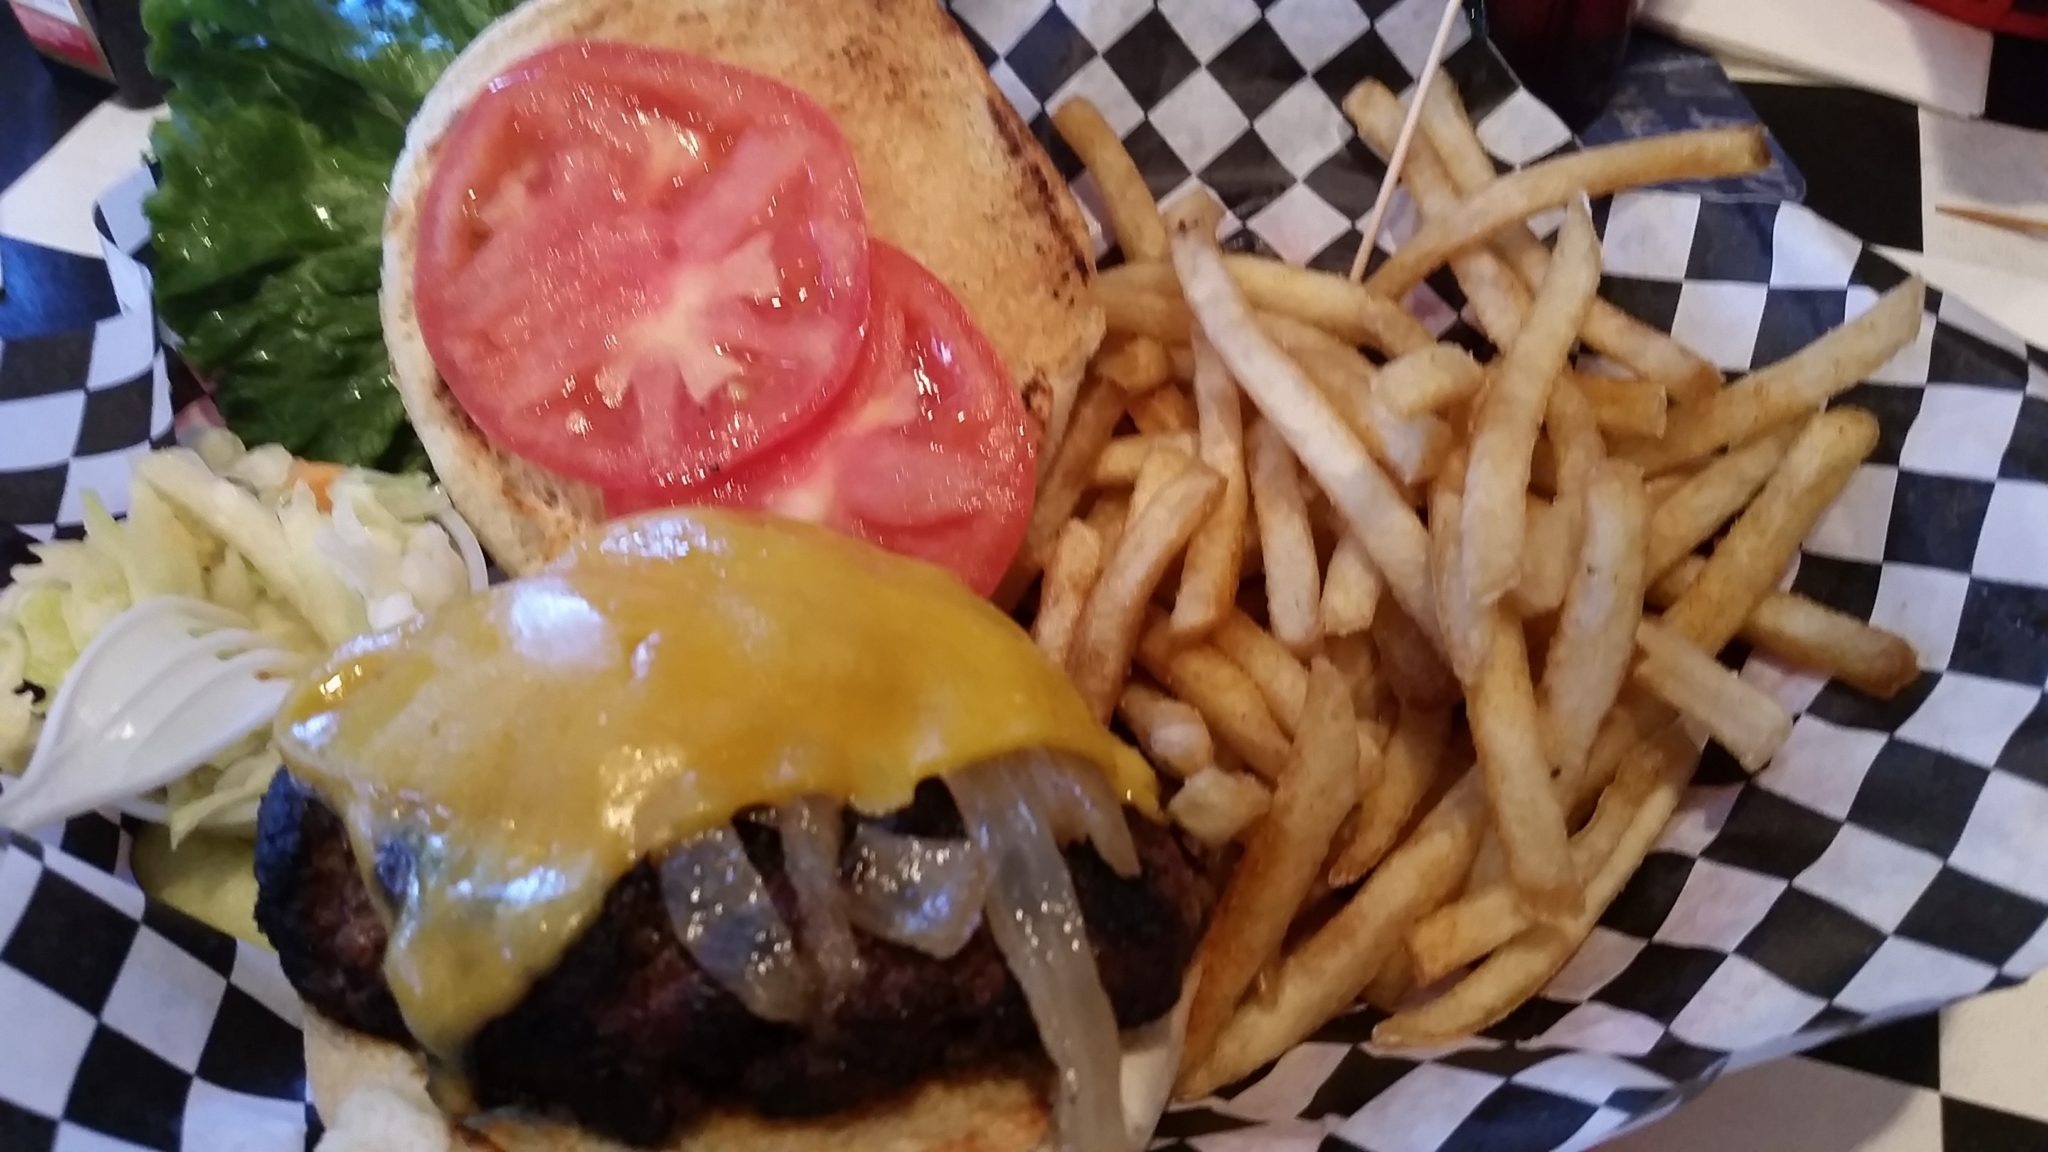 We're looking for the best burger pics in America